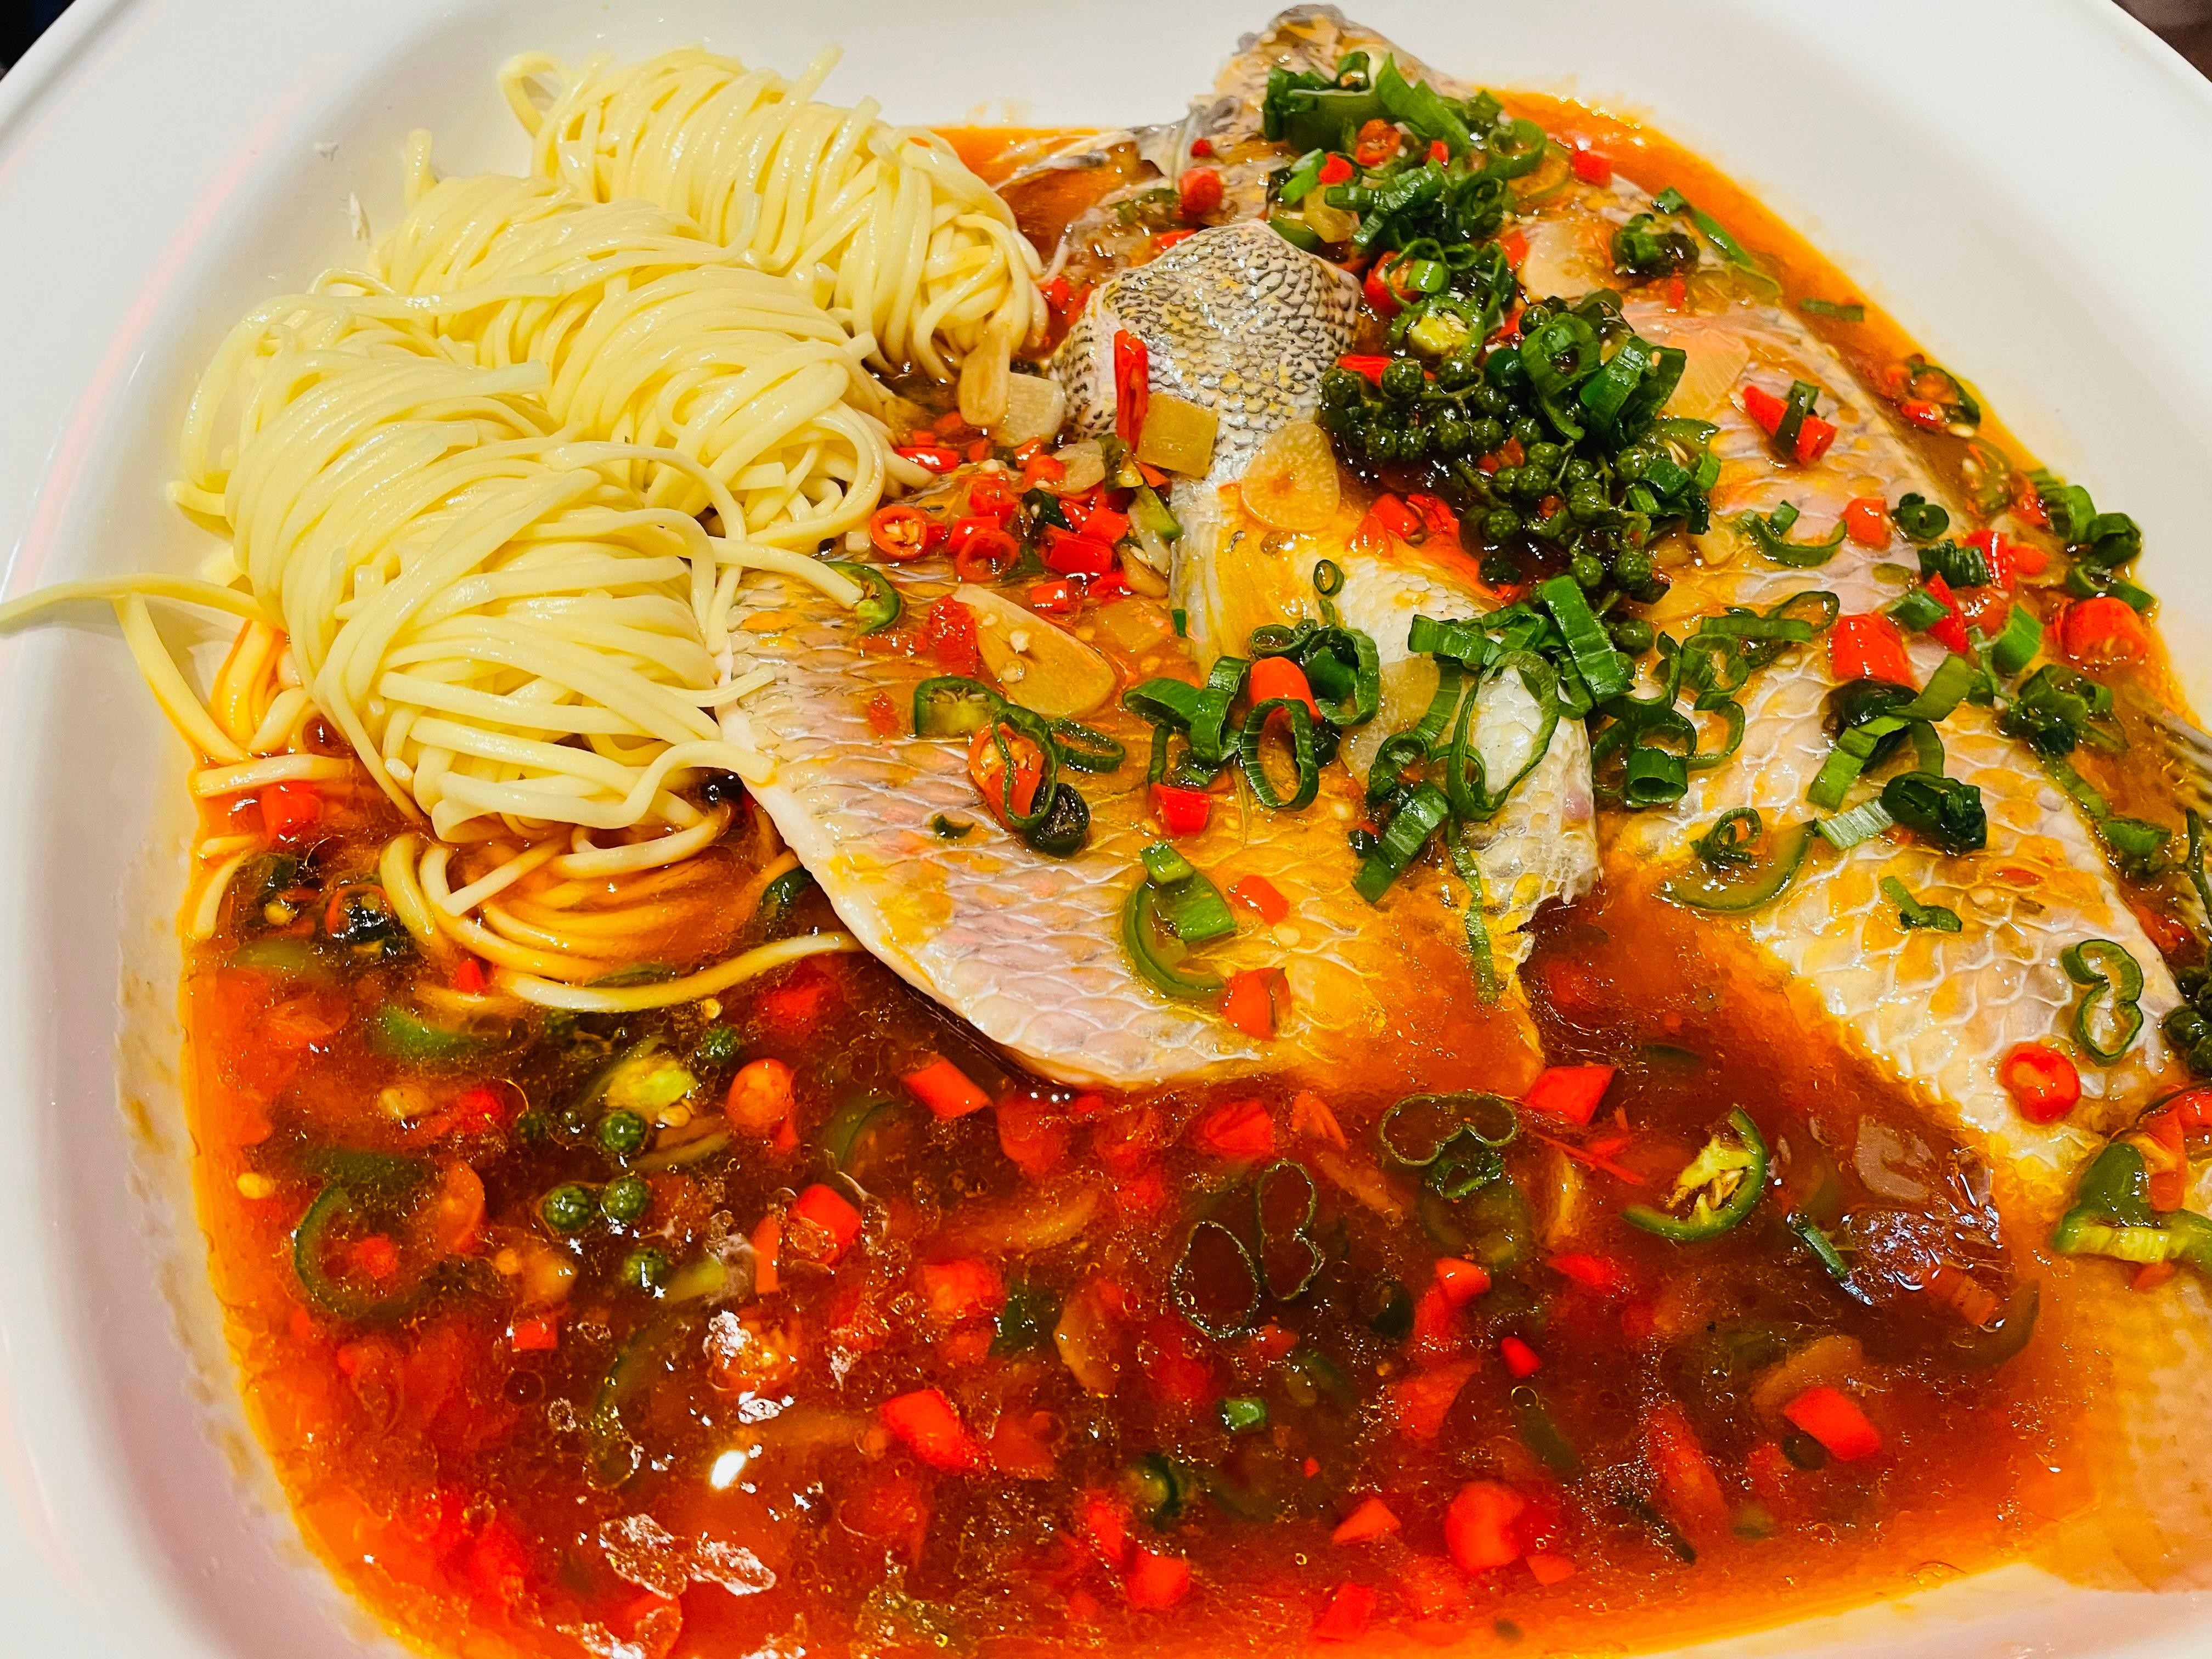 Steamed Whole Fish with Noodles🌶️🌶️🌶️🌶️ 过江鱼配挂面